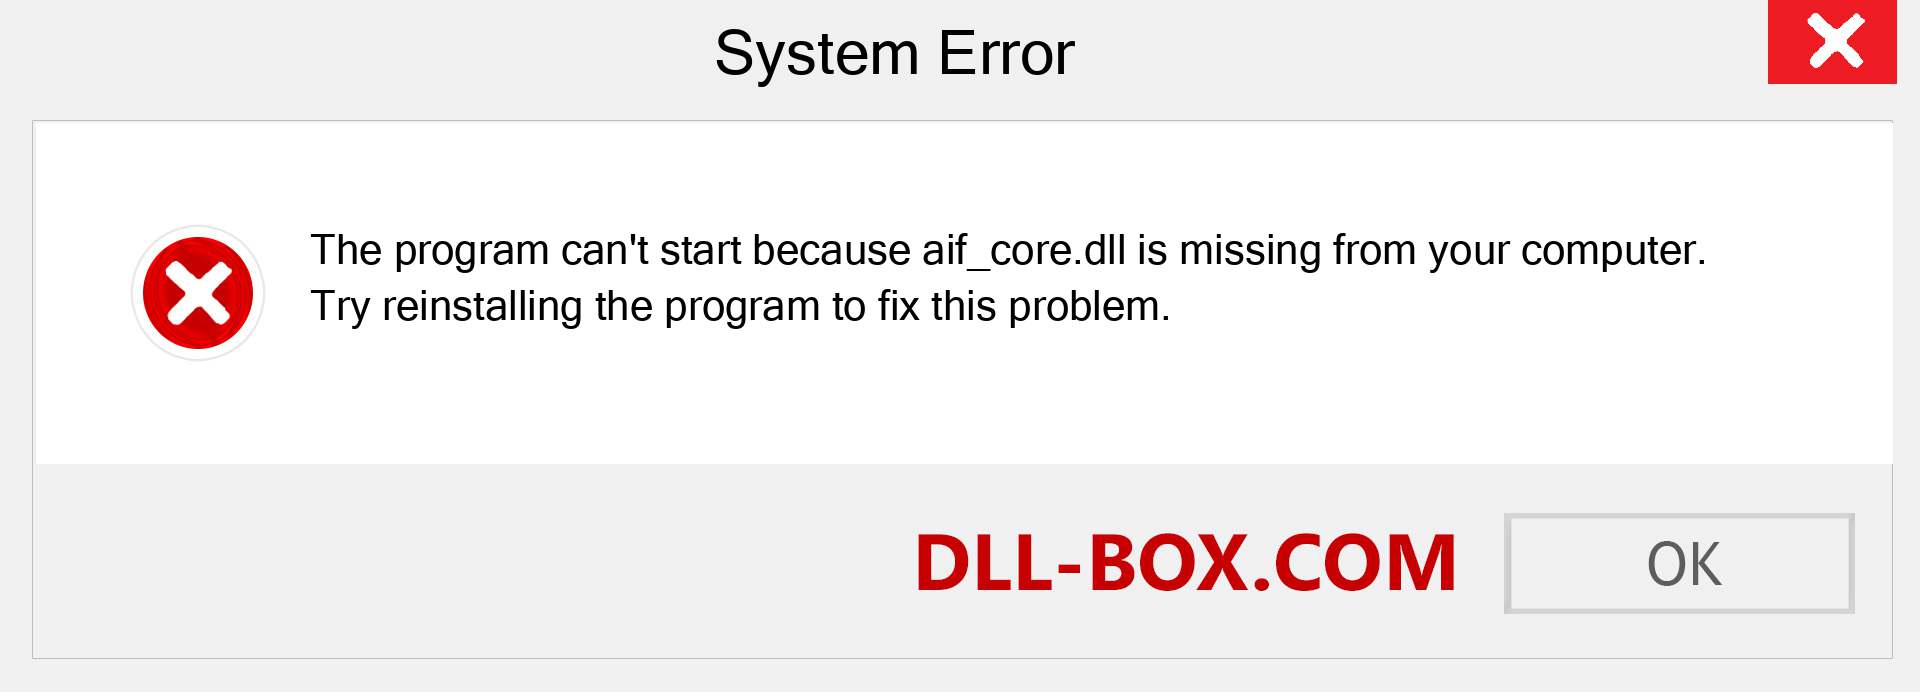  aif_core.dll file is missing?. Download for Windows 7, 8, 10 - Fix  aif_core dll Missing Error on Windows, photos, images